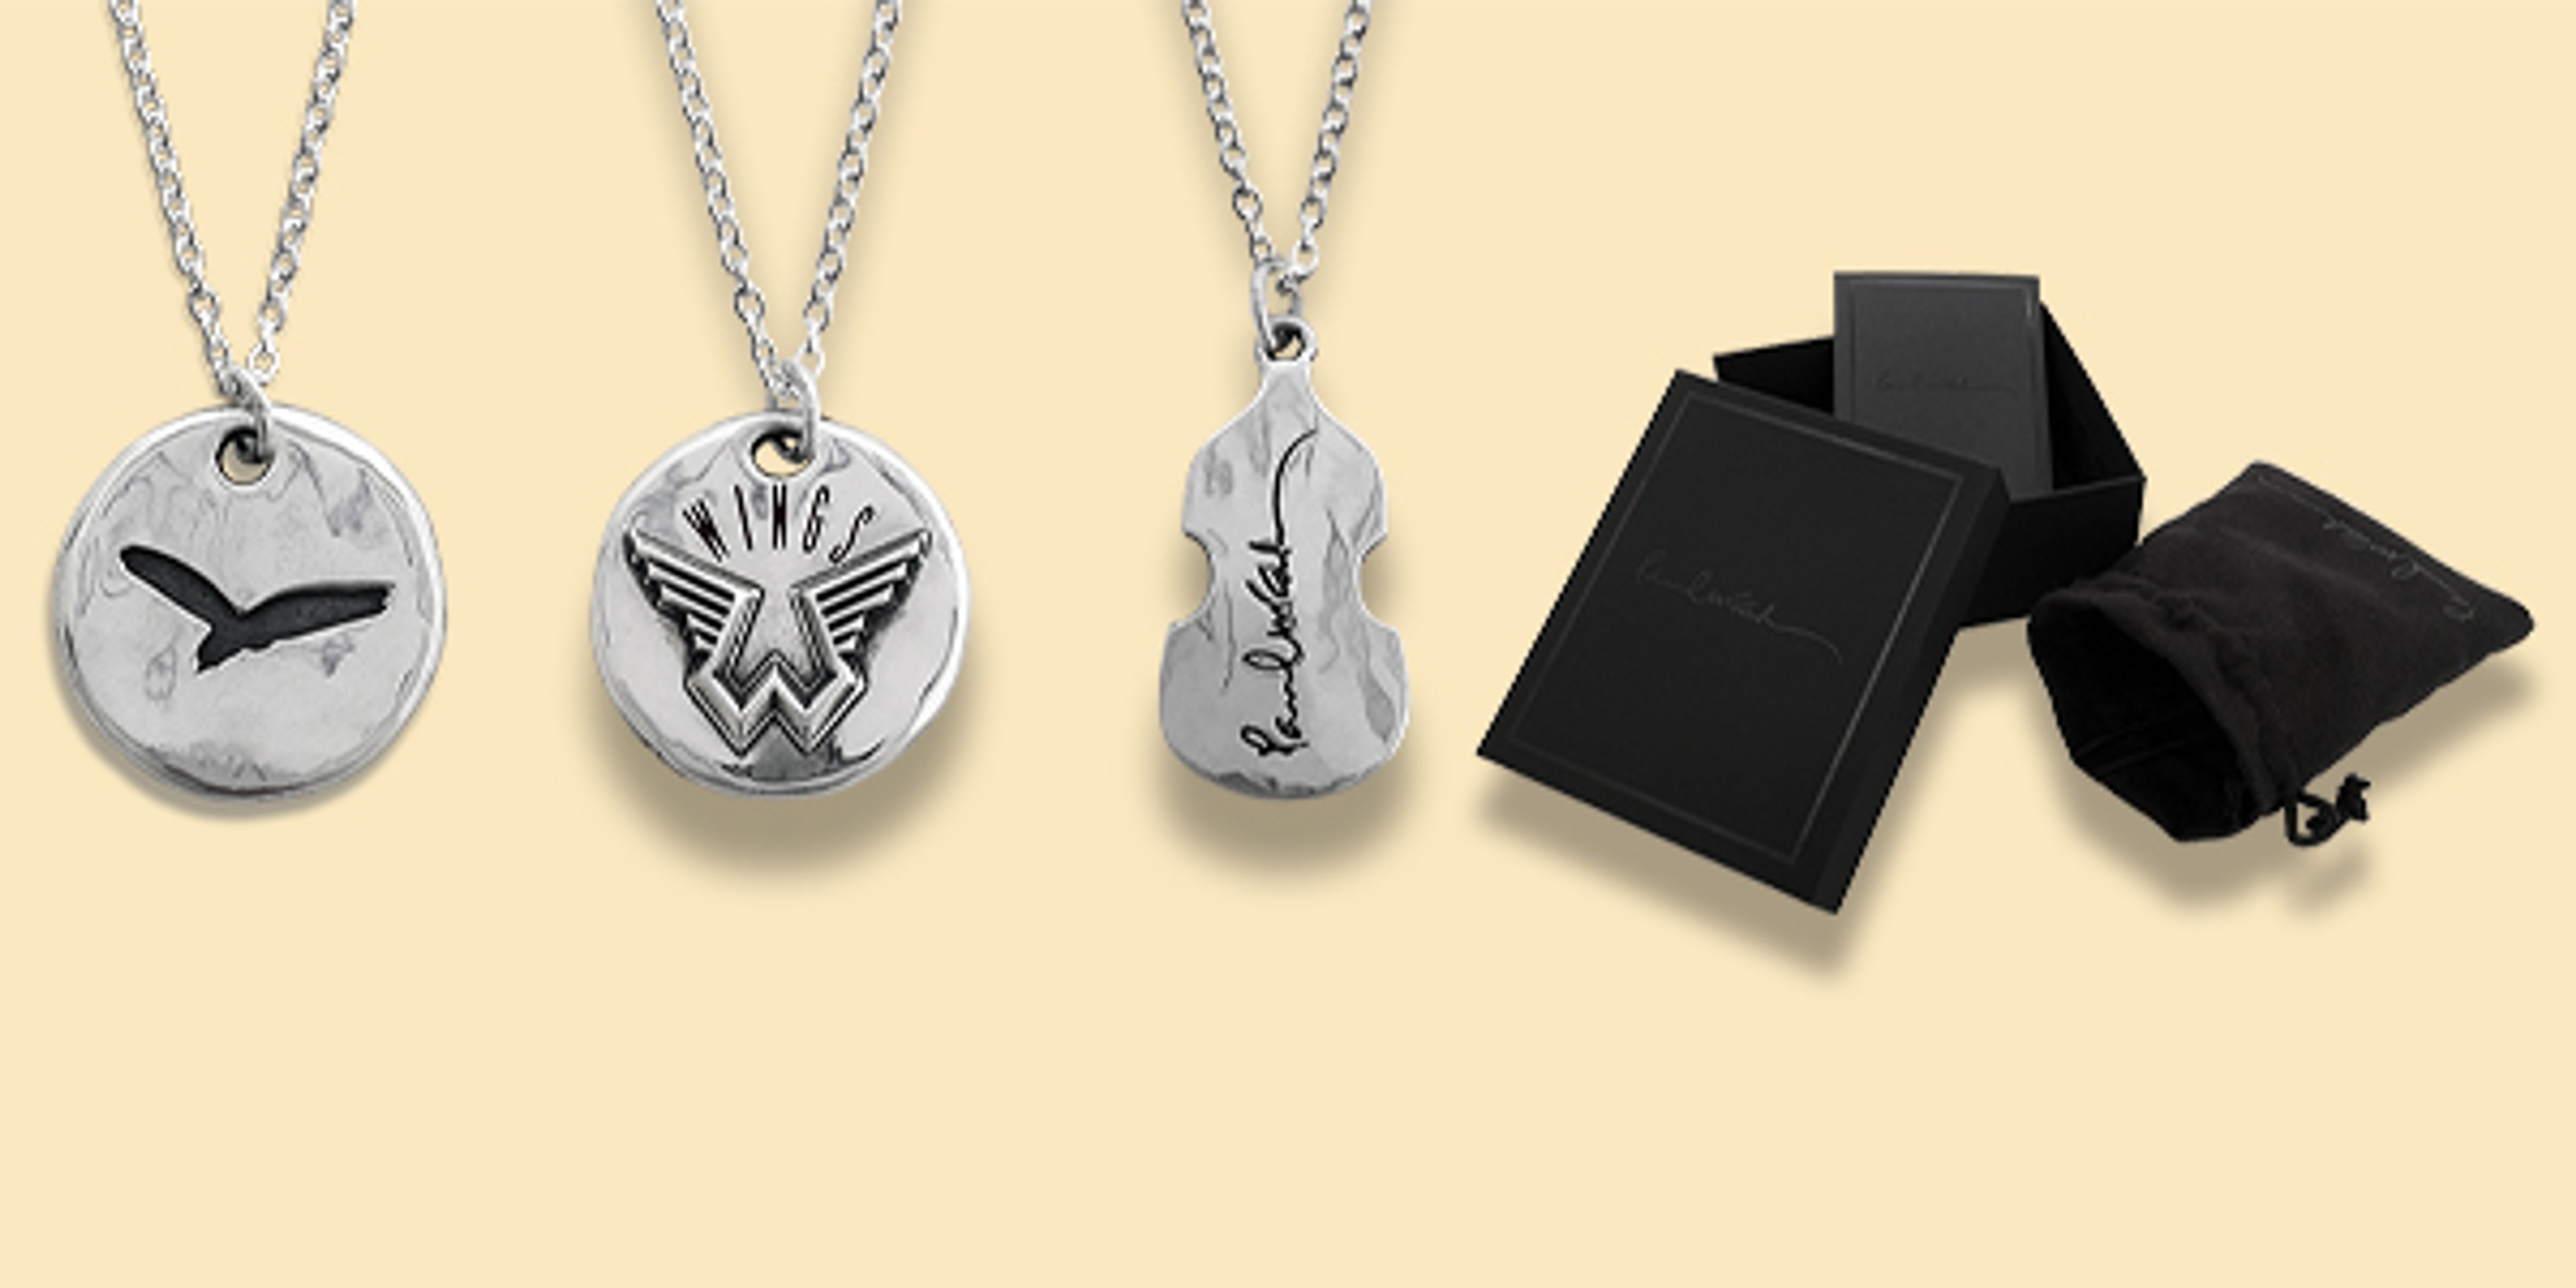 New Sterling Silver Pendants On Sale Now